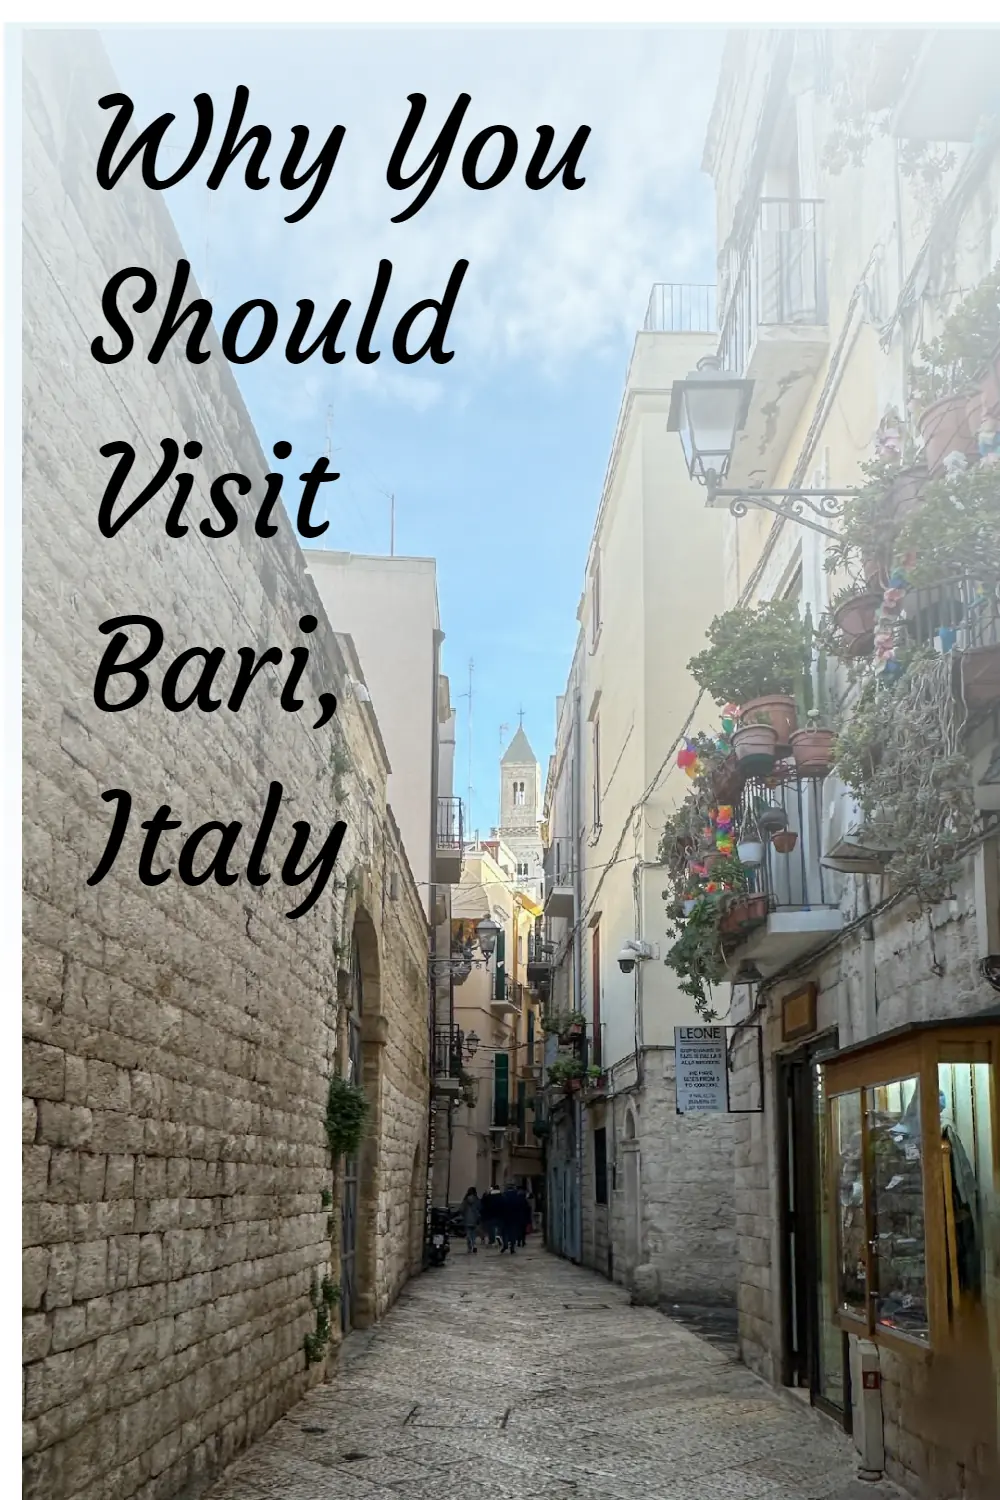 In one day, travel through time, savor traditional pasta, visit historical sites, and stroll along scenic paths. Learn the art of Orecchiette pasta making from the Nonnas, explore the charming Castello Svevo di Bari, wander through ancient alleyways, and delight in the local delicacies of Bari. Get the best of Bari in one day with us.